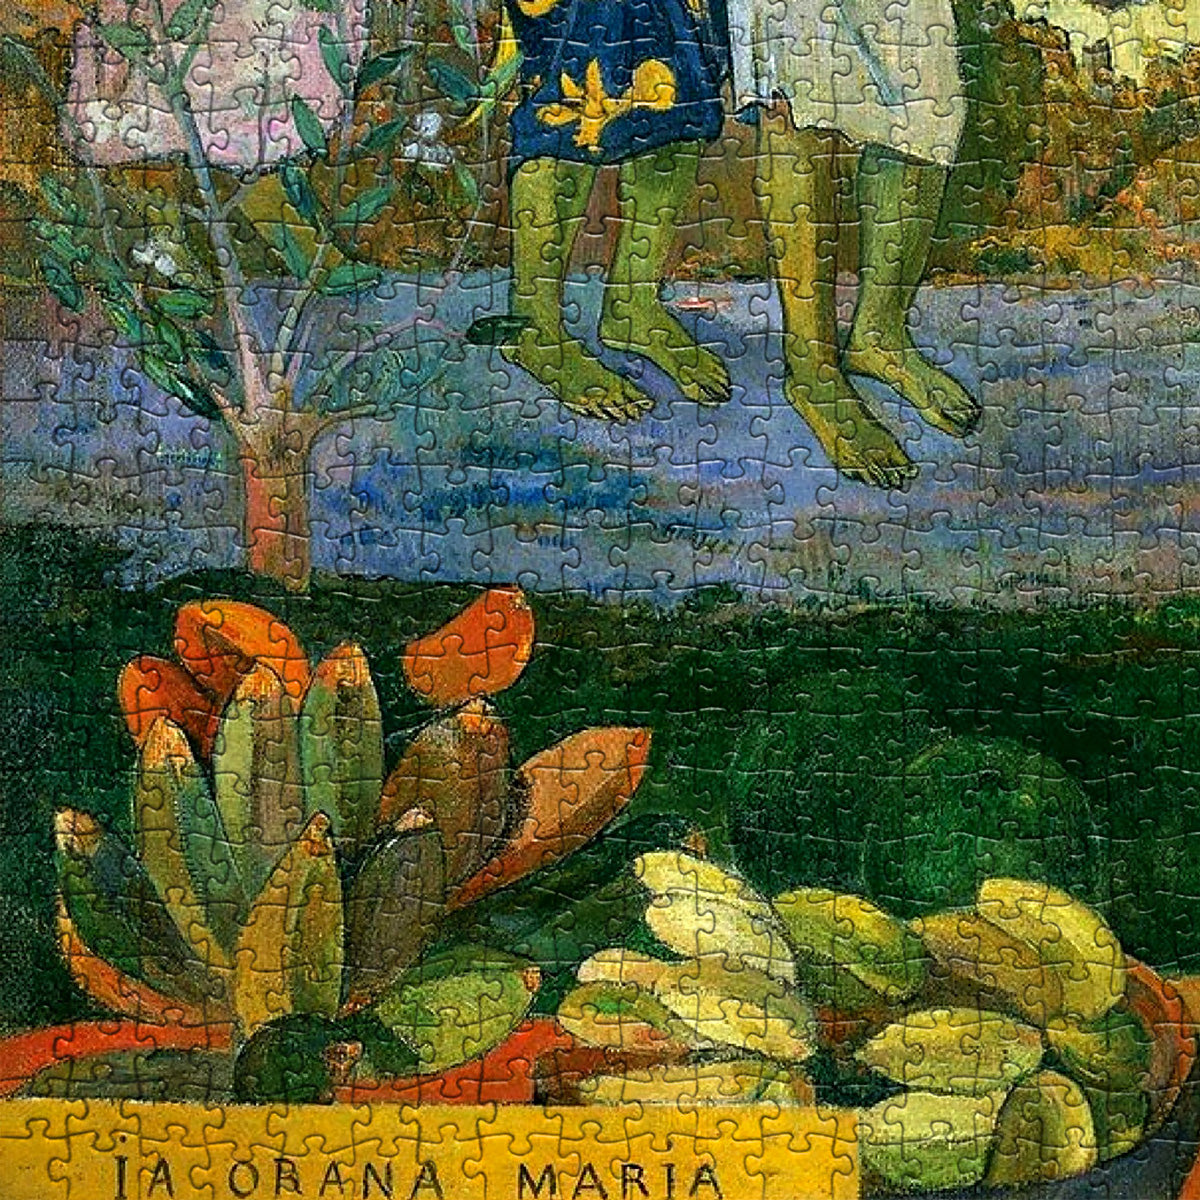 A challenging 1000-piece jigsaw puzzle showcasing Paul Gauguin's La Orana Maria for puzzle enthusiasts.